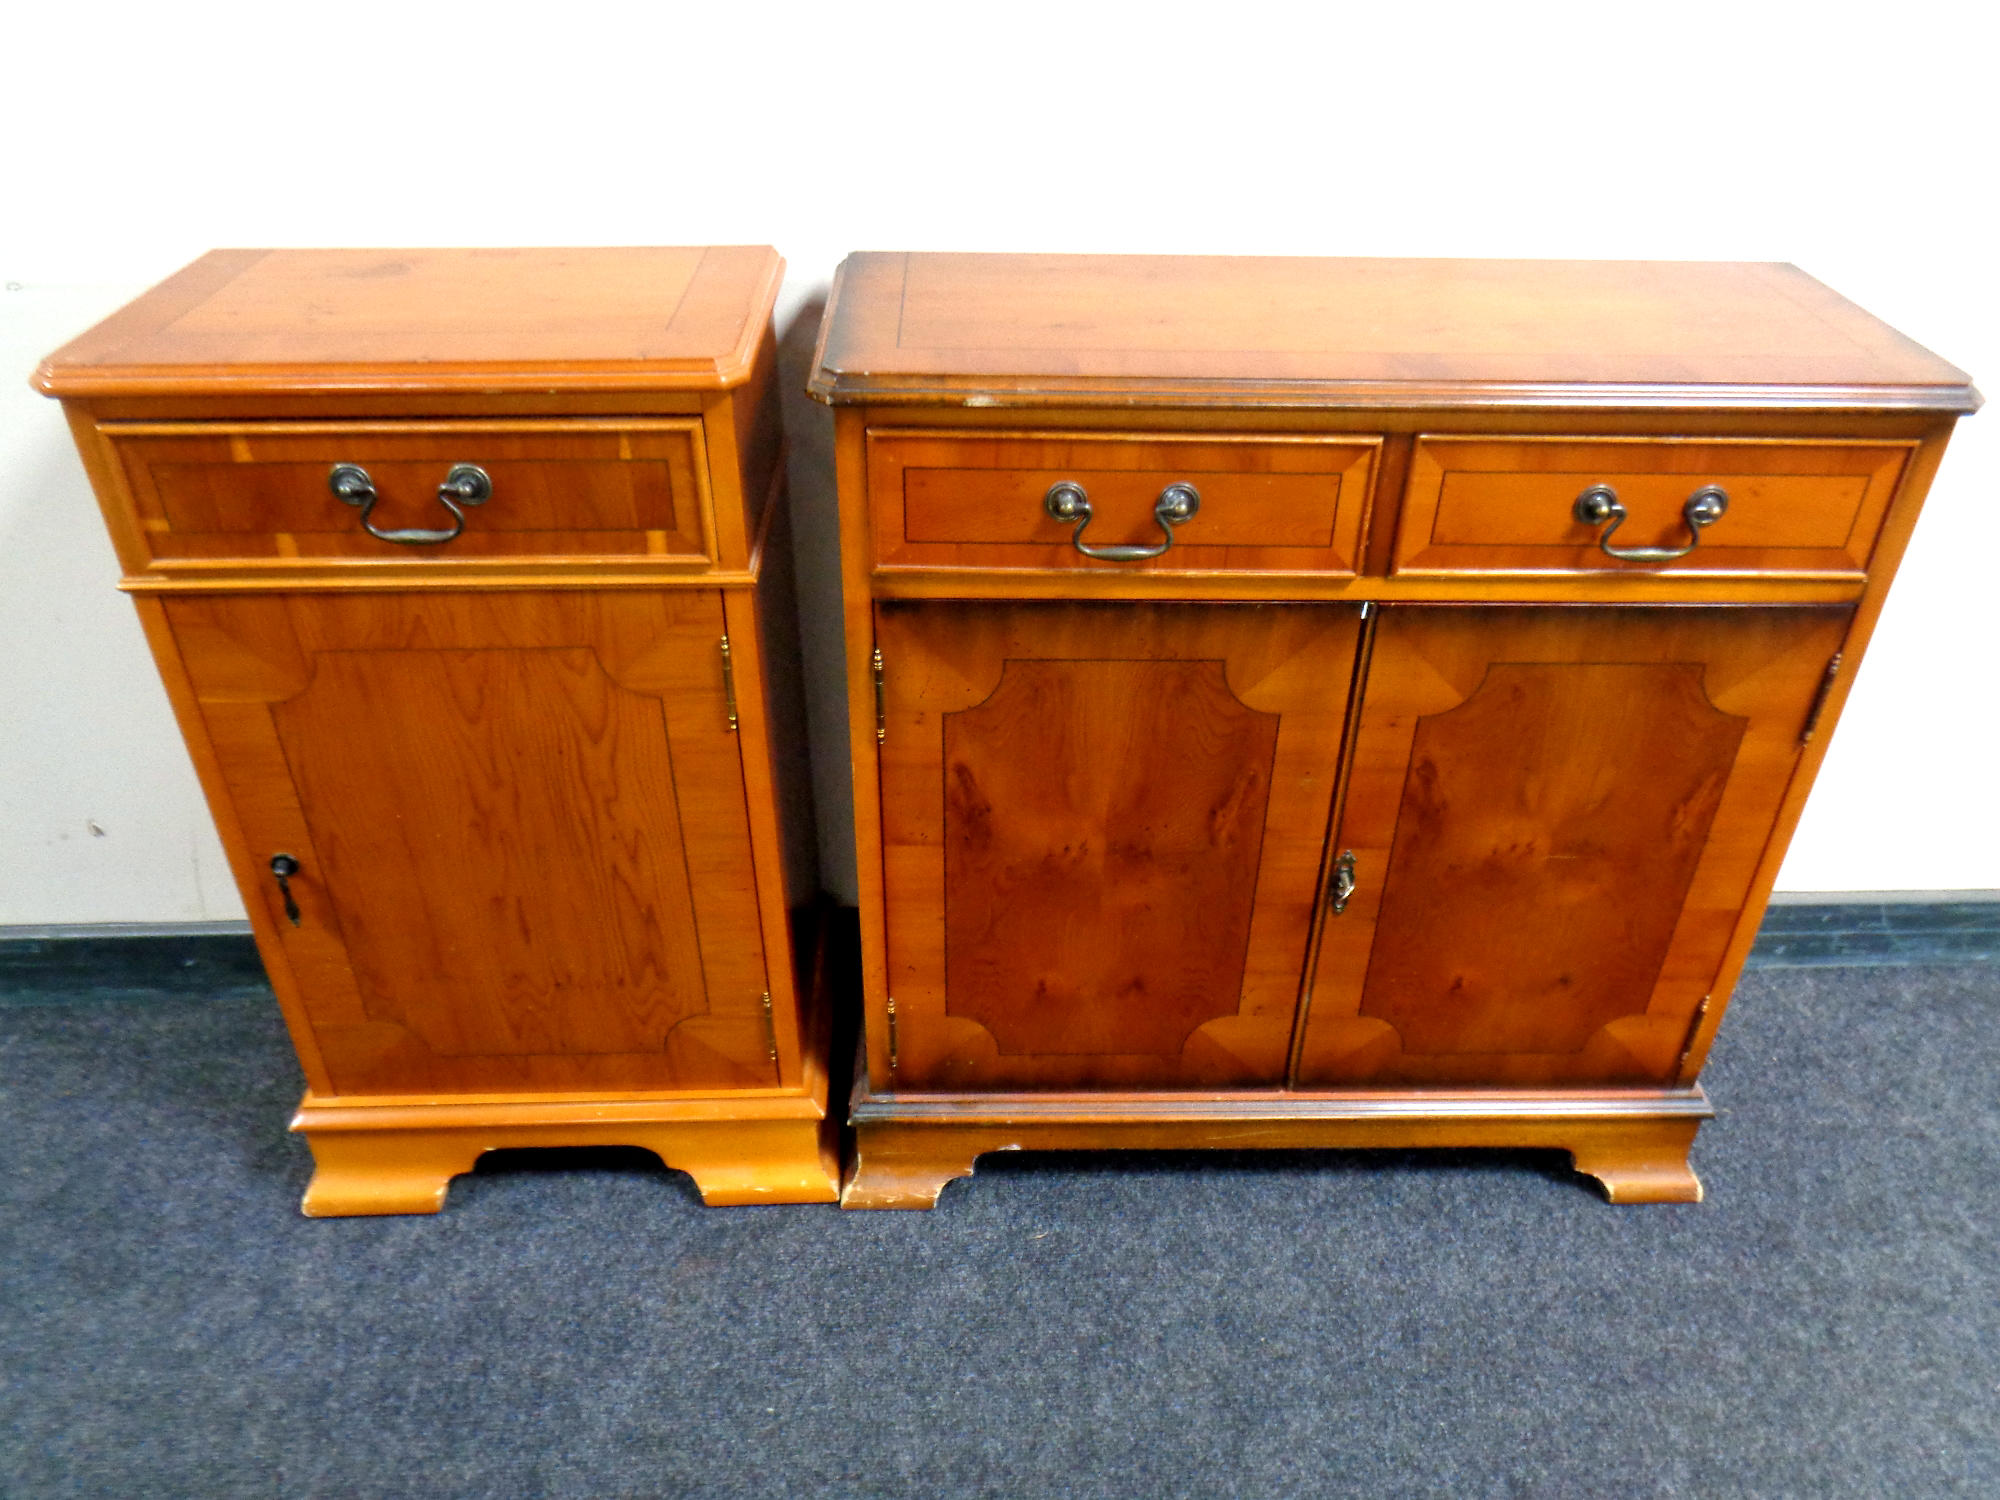 An inlaid yew wood double door cupboard fitted two drawers above together with similar one drawer